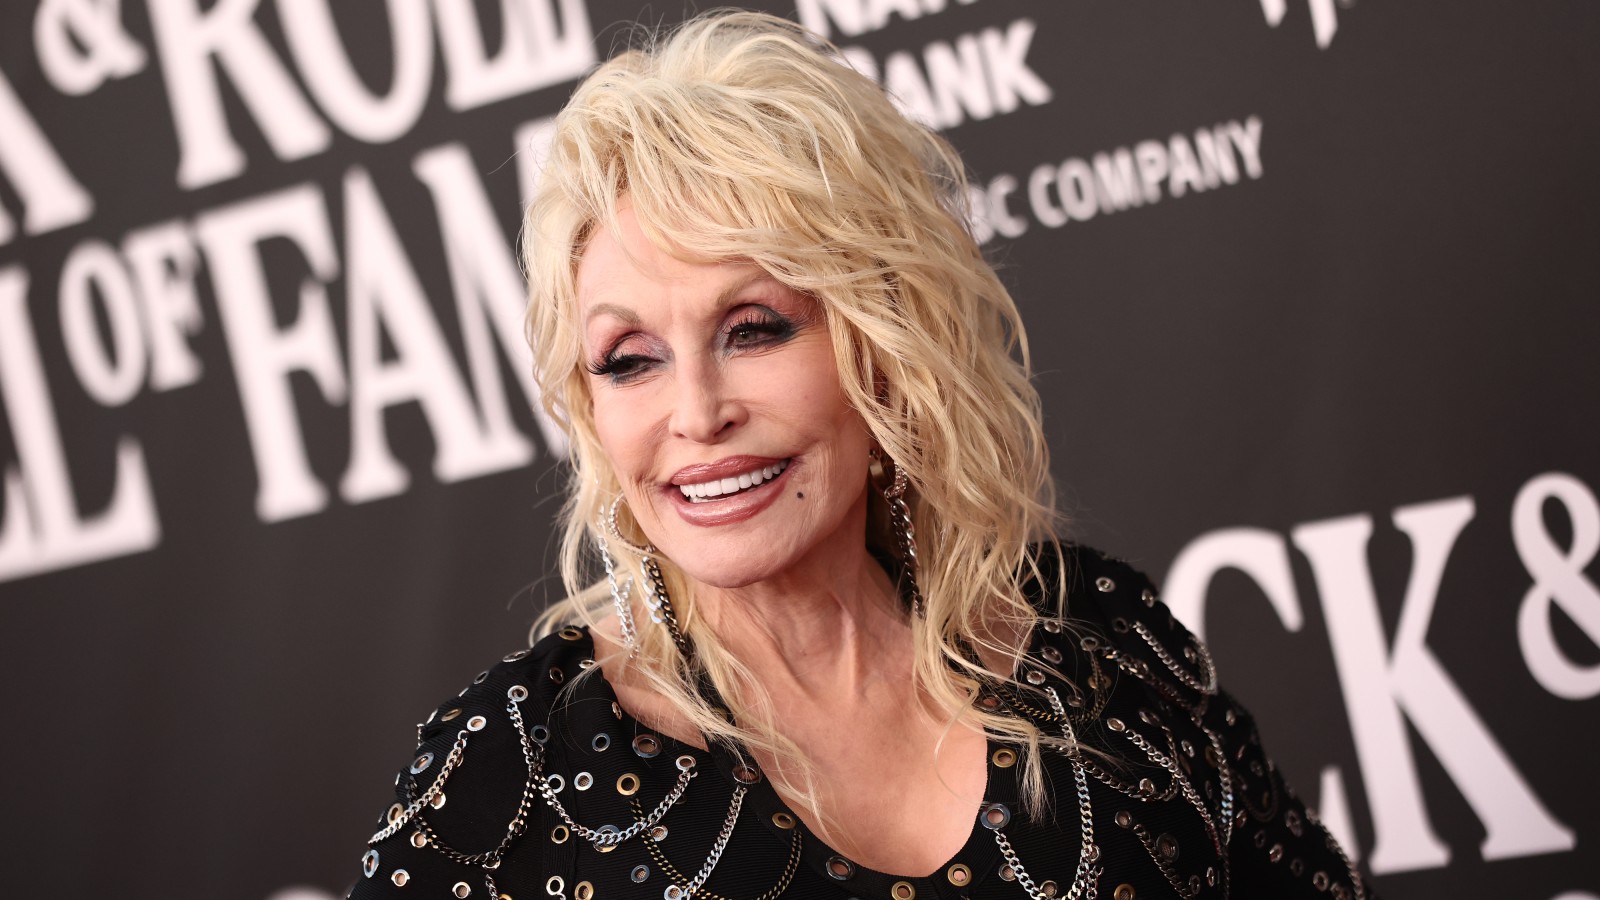 Country legend Dolly Parton joins Rock and Roll Hall of Fame, begins work on rock album